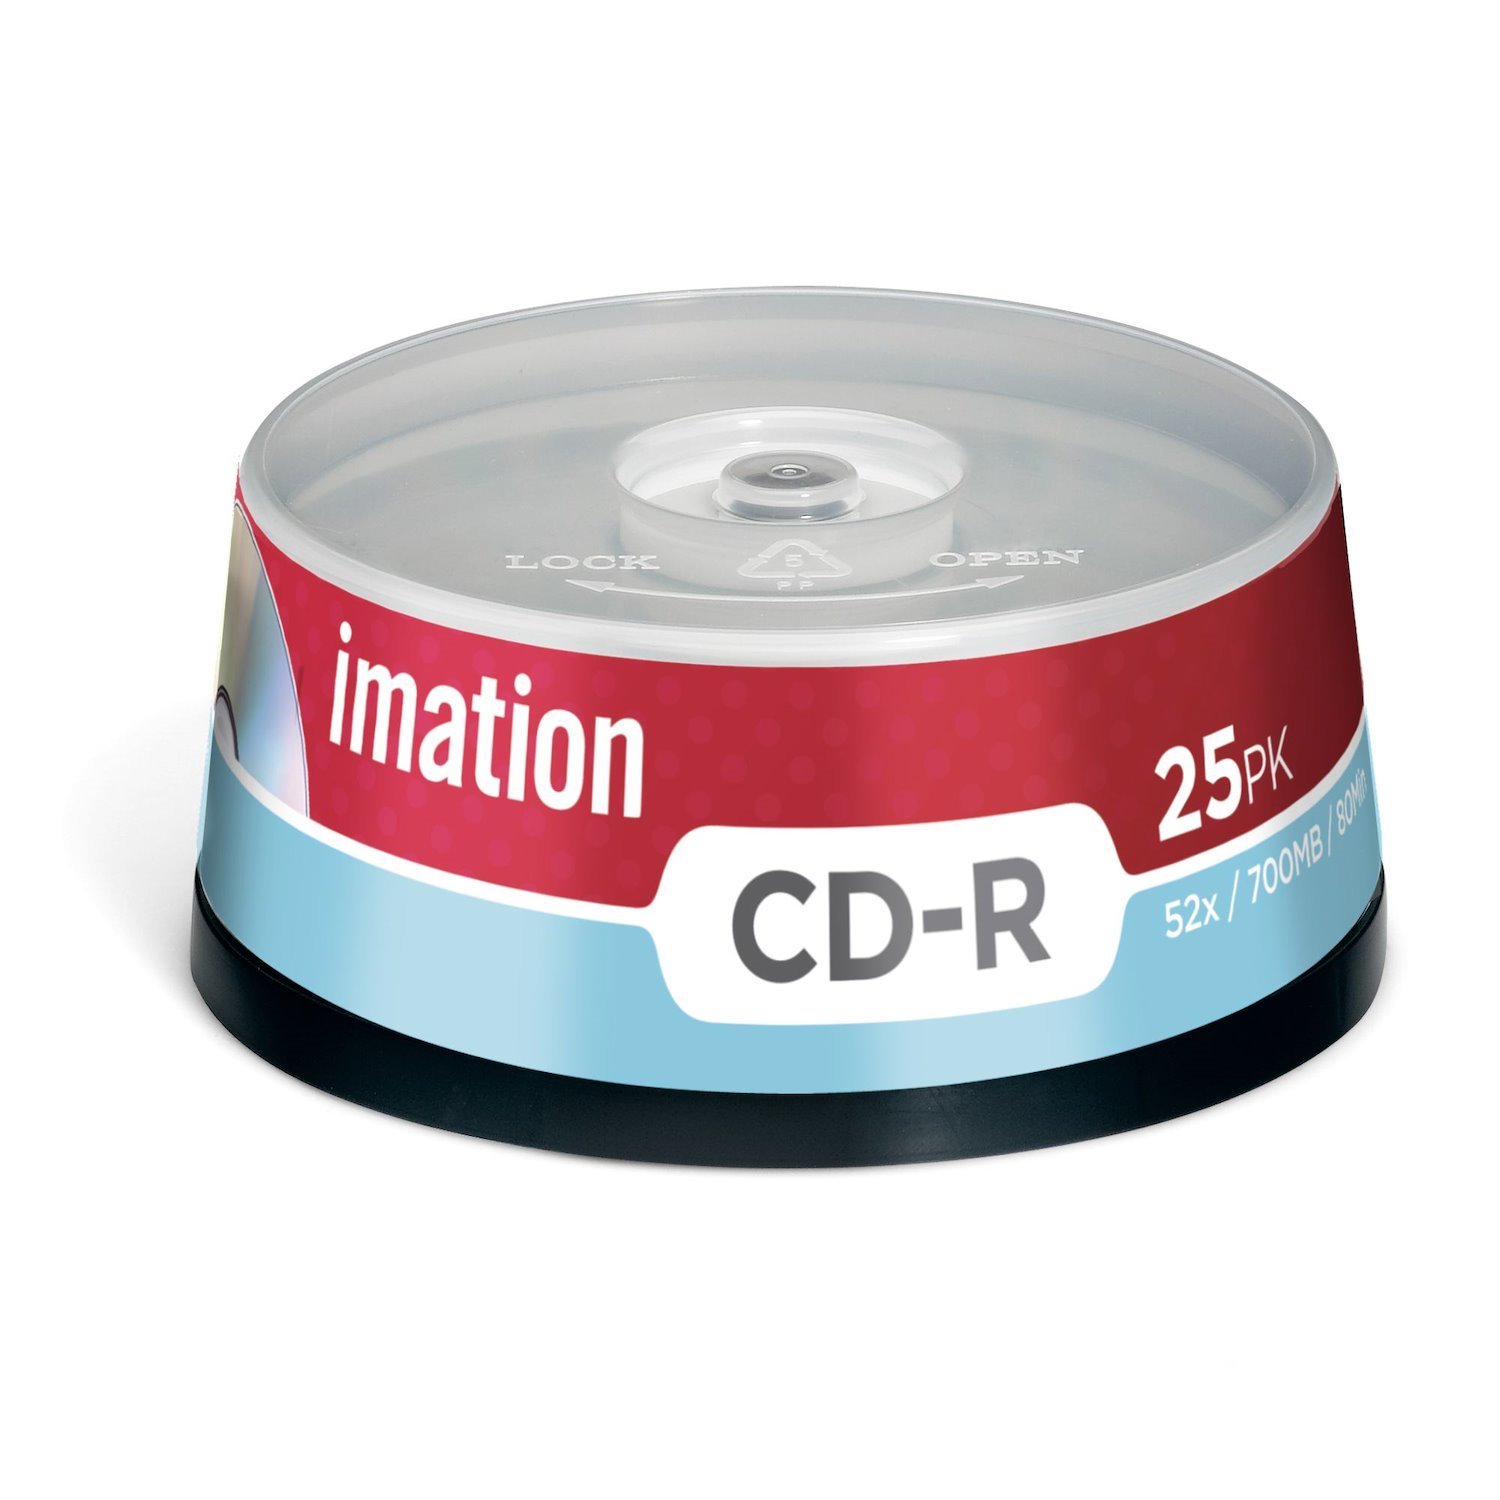 Imation 73000023074 Blank CD CD-R 700 MB 25 PC[S] (Imation CD-R 52X 25PK Spindle 700MB 15-Lang [1Year Warranty])